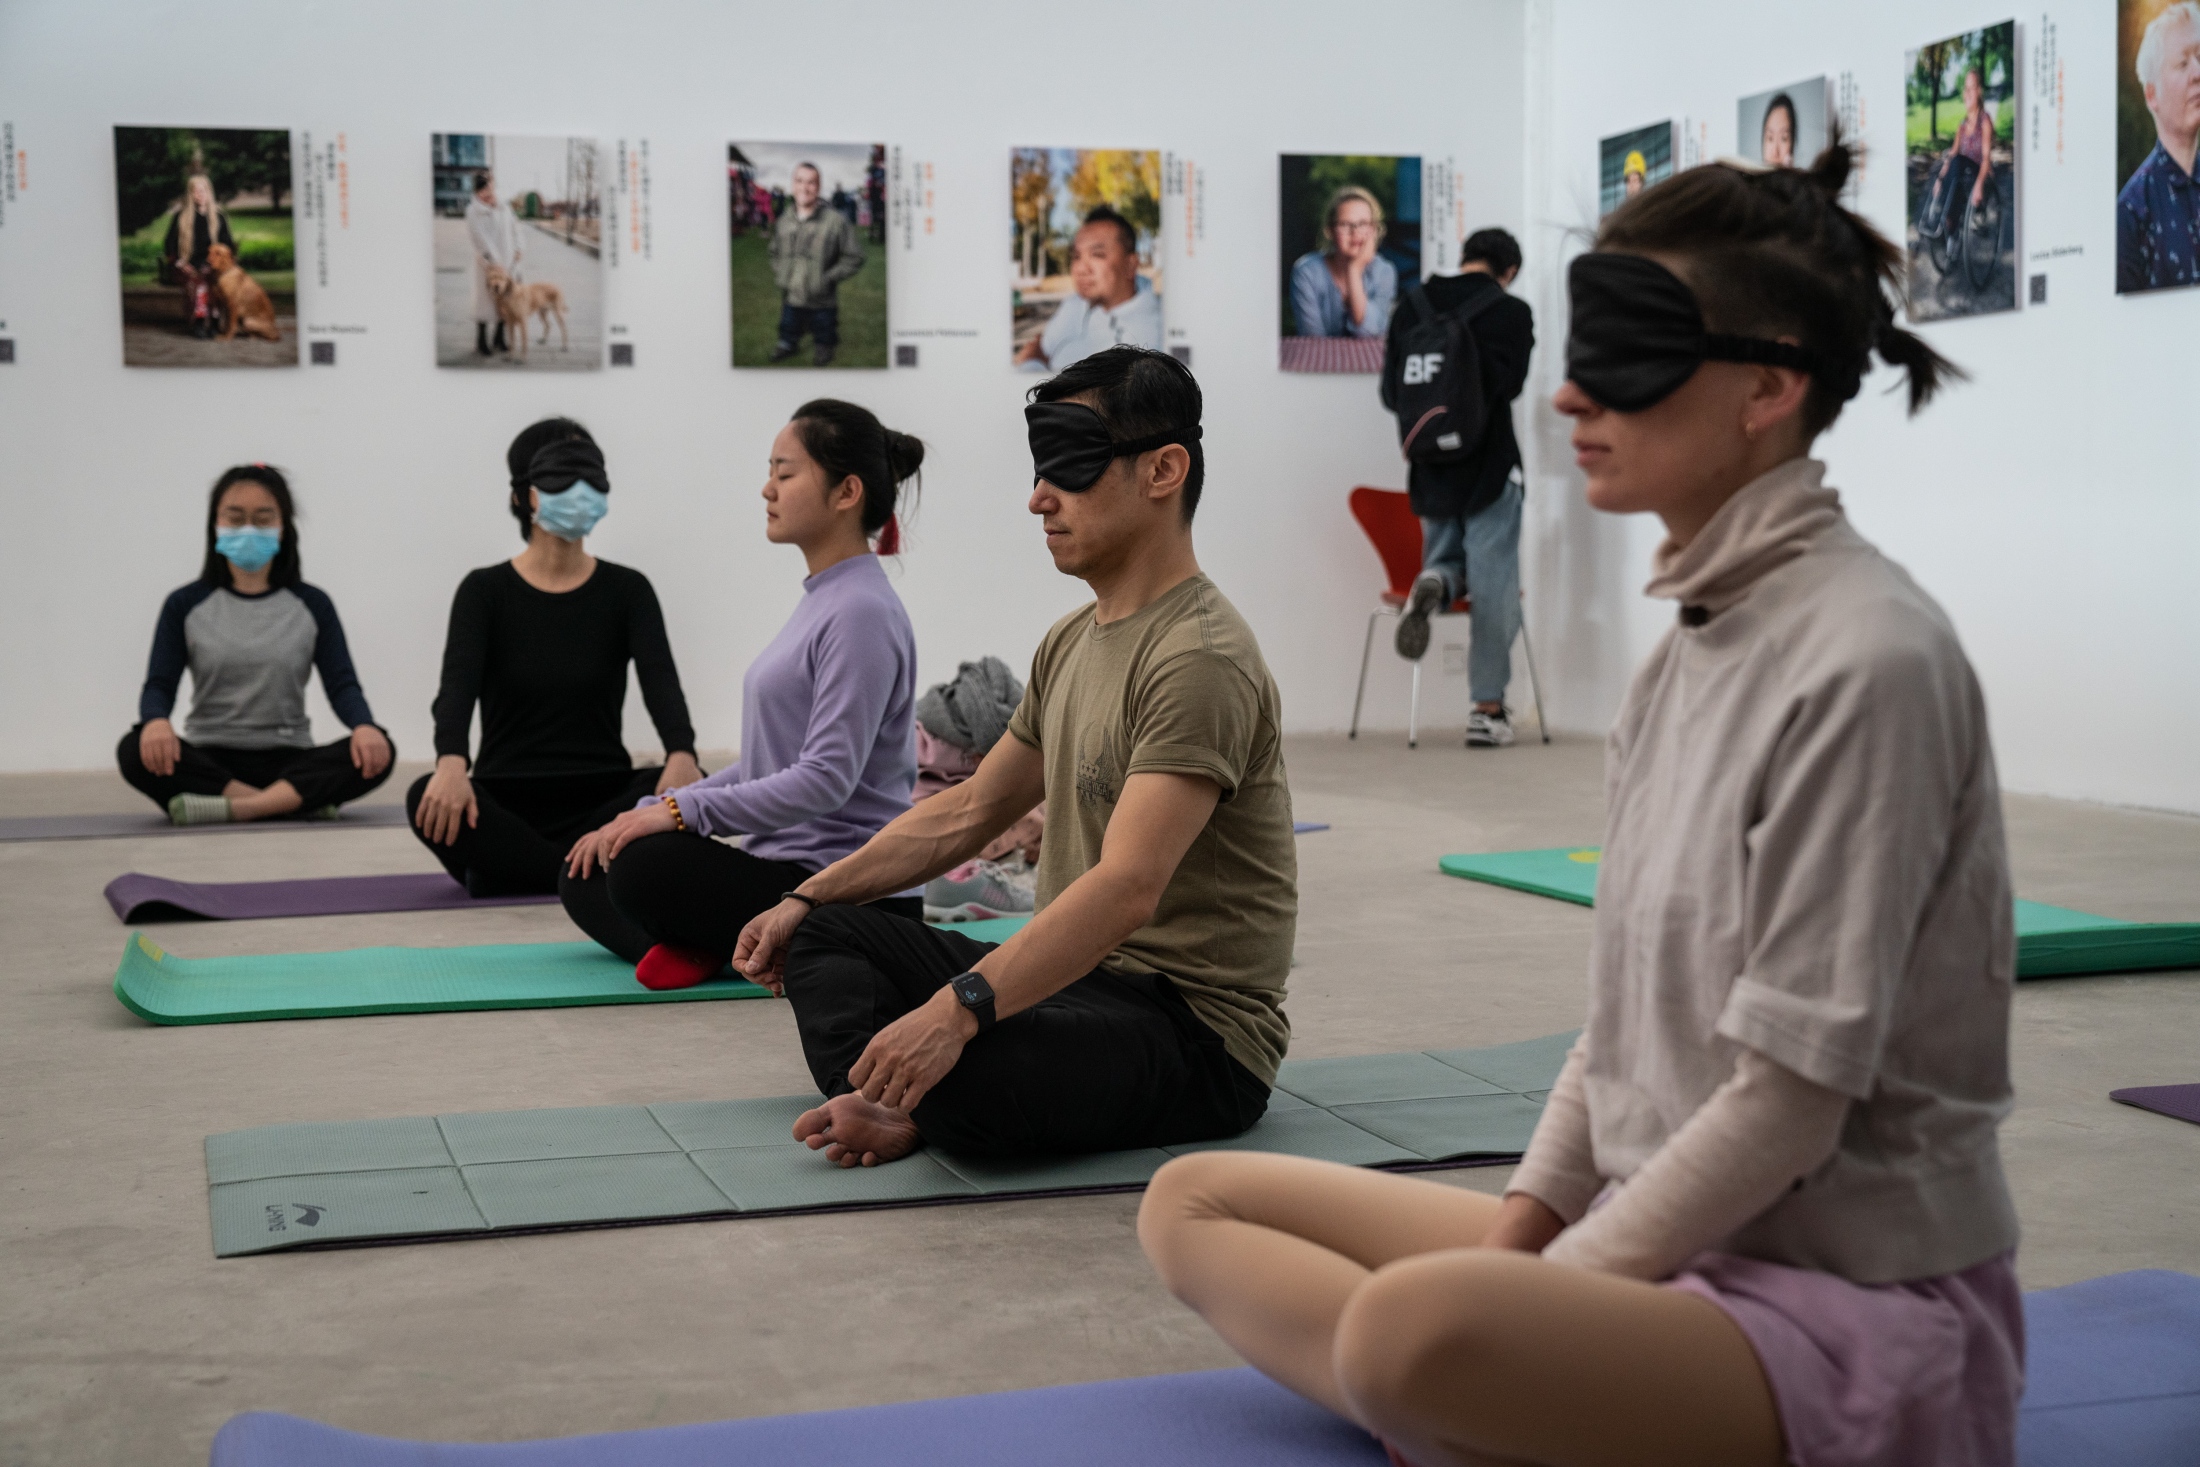 Participants are encouraged to put on eye-masks during...